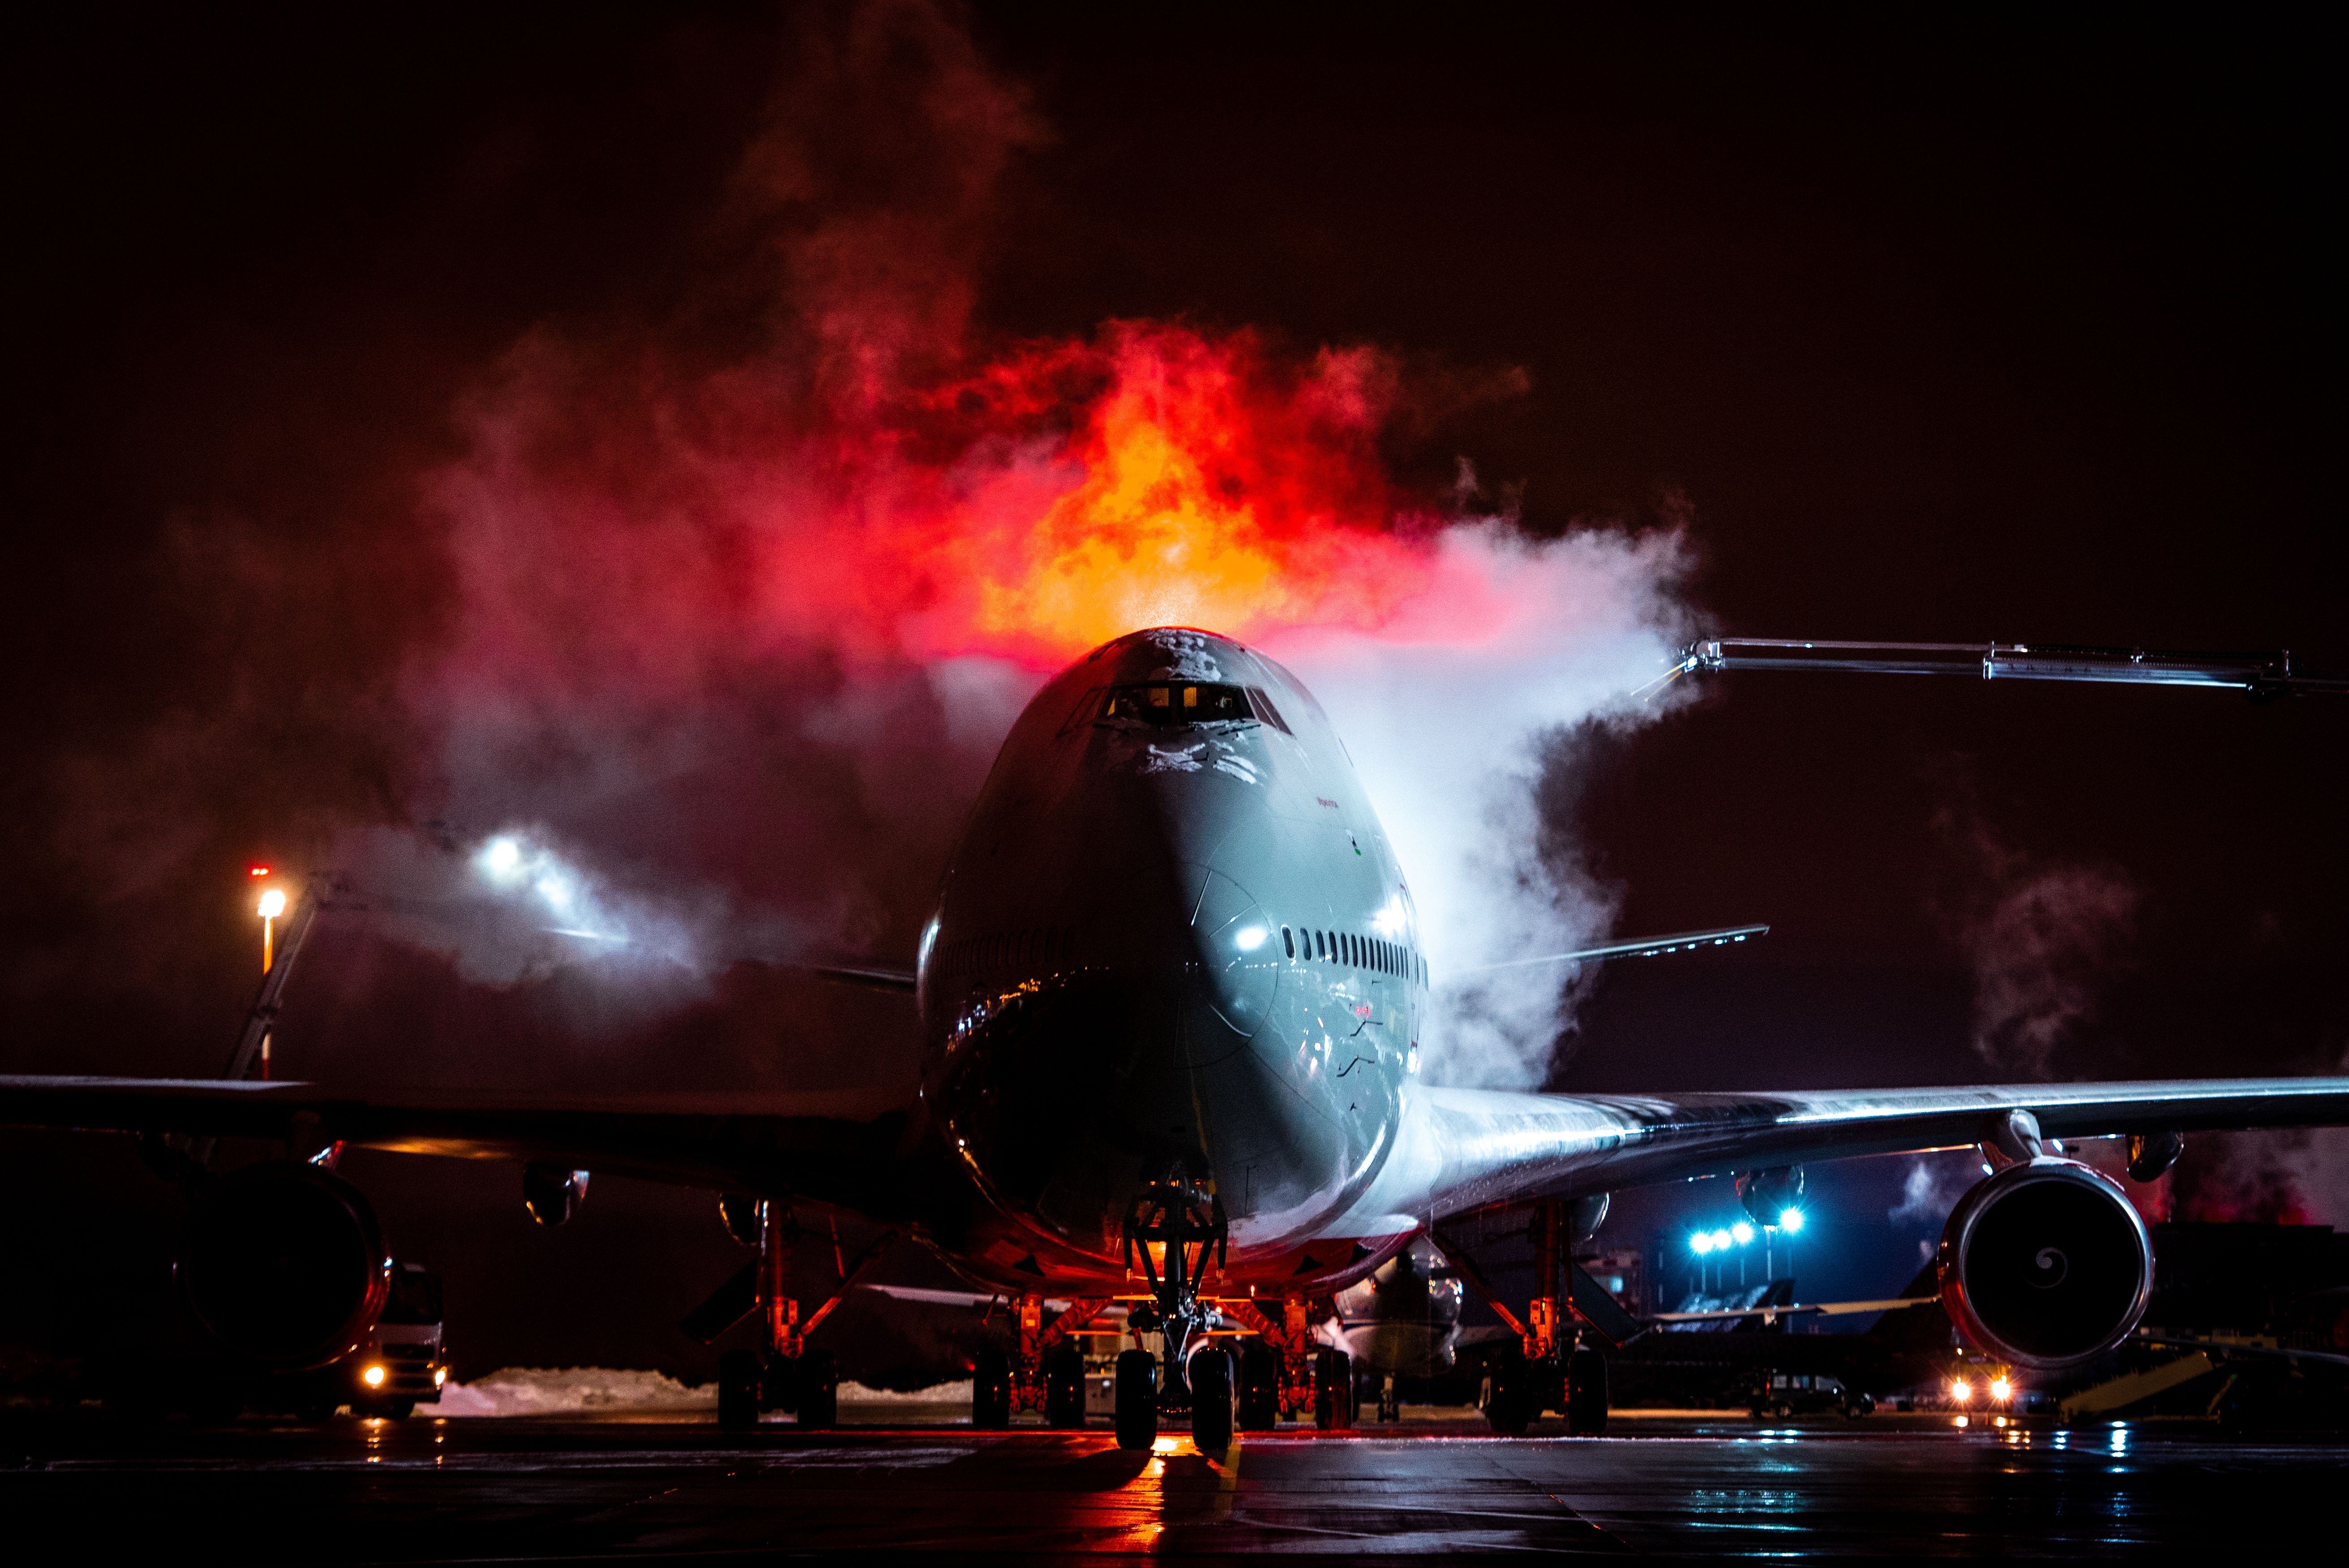 A Boeing 747-400 Being De-iced At Night.